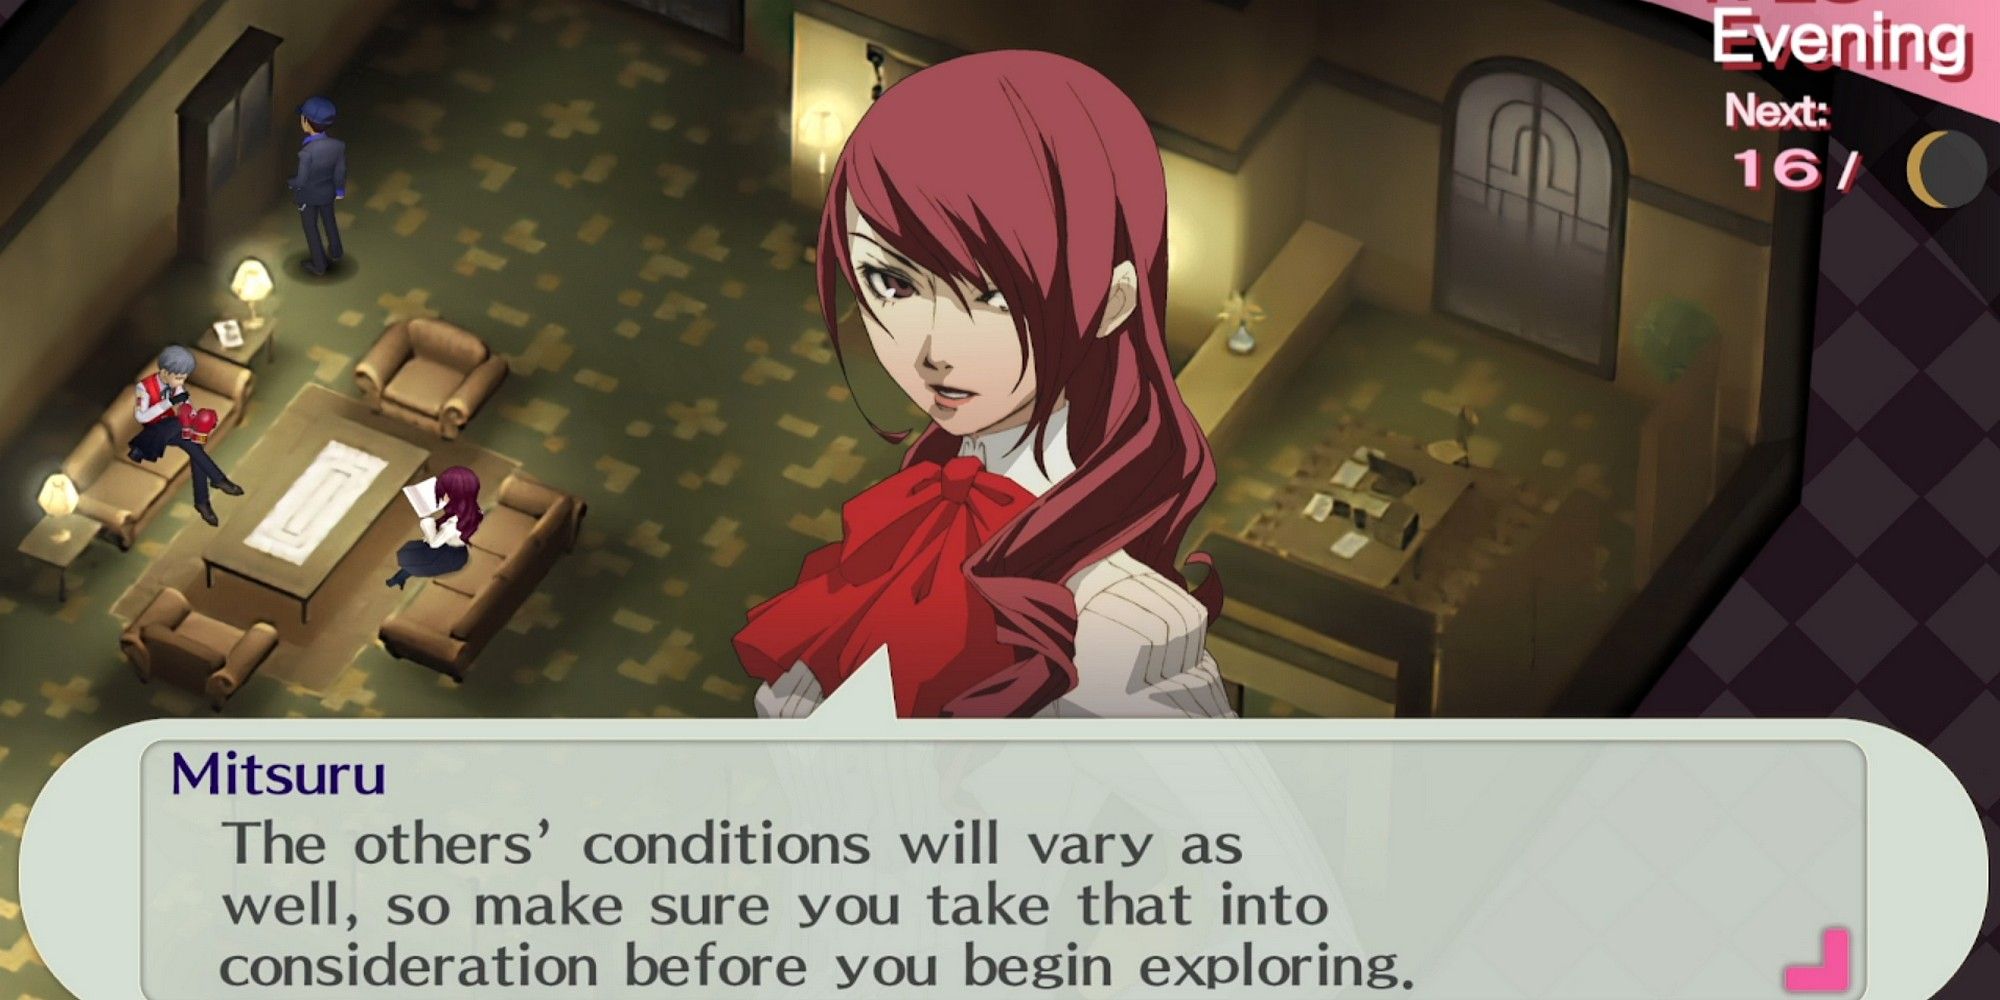 mitsuru warning you that the party will deteriorate in condition in persona 3 portable